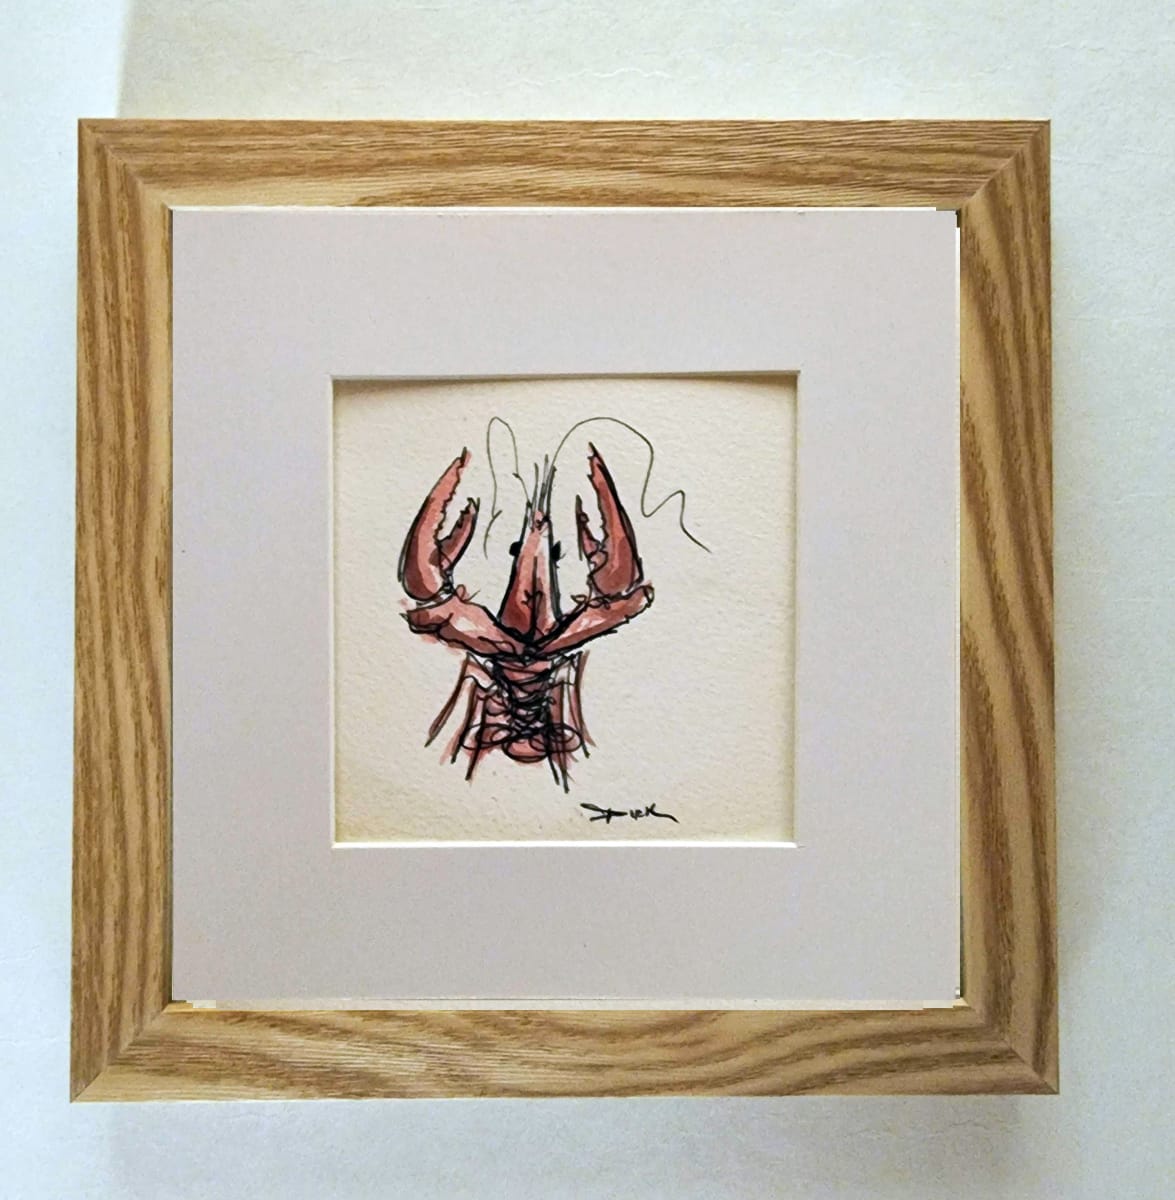 Crawfish petite on paper #1 by Dirk Guidry 